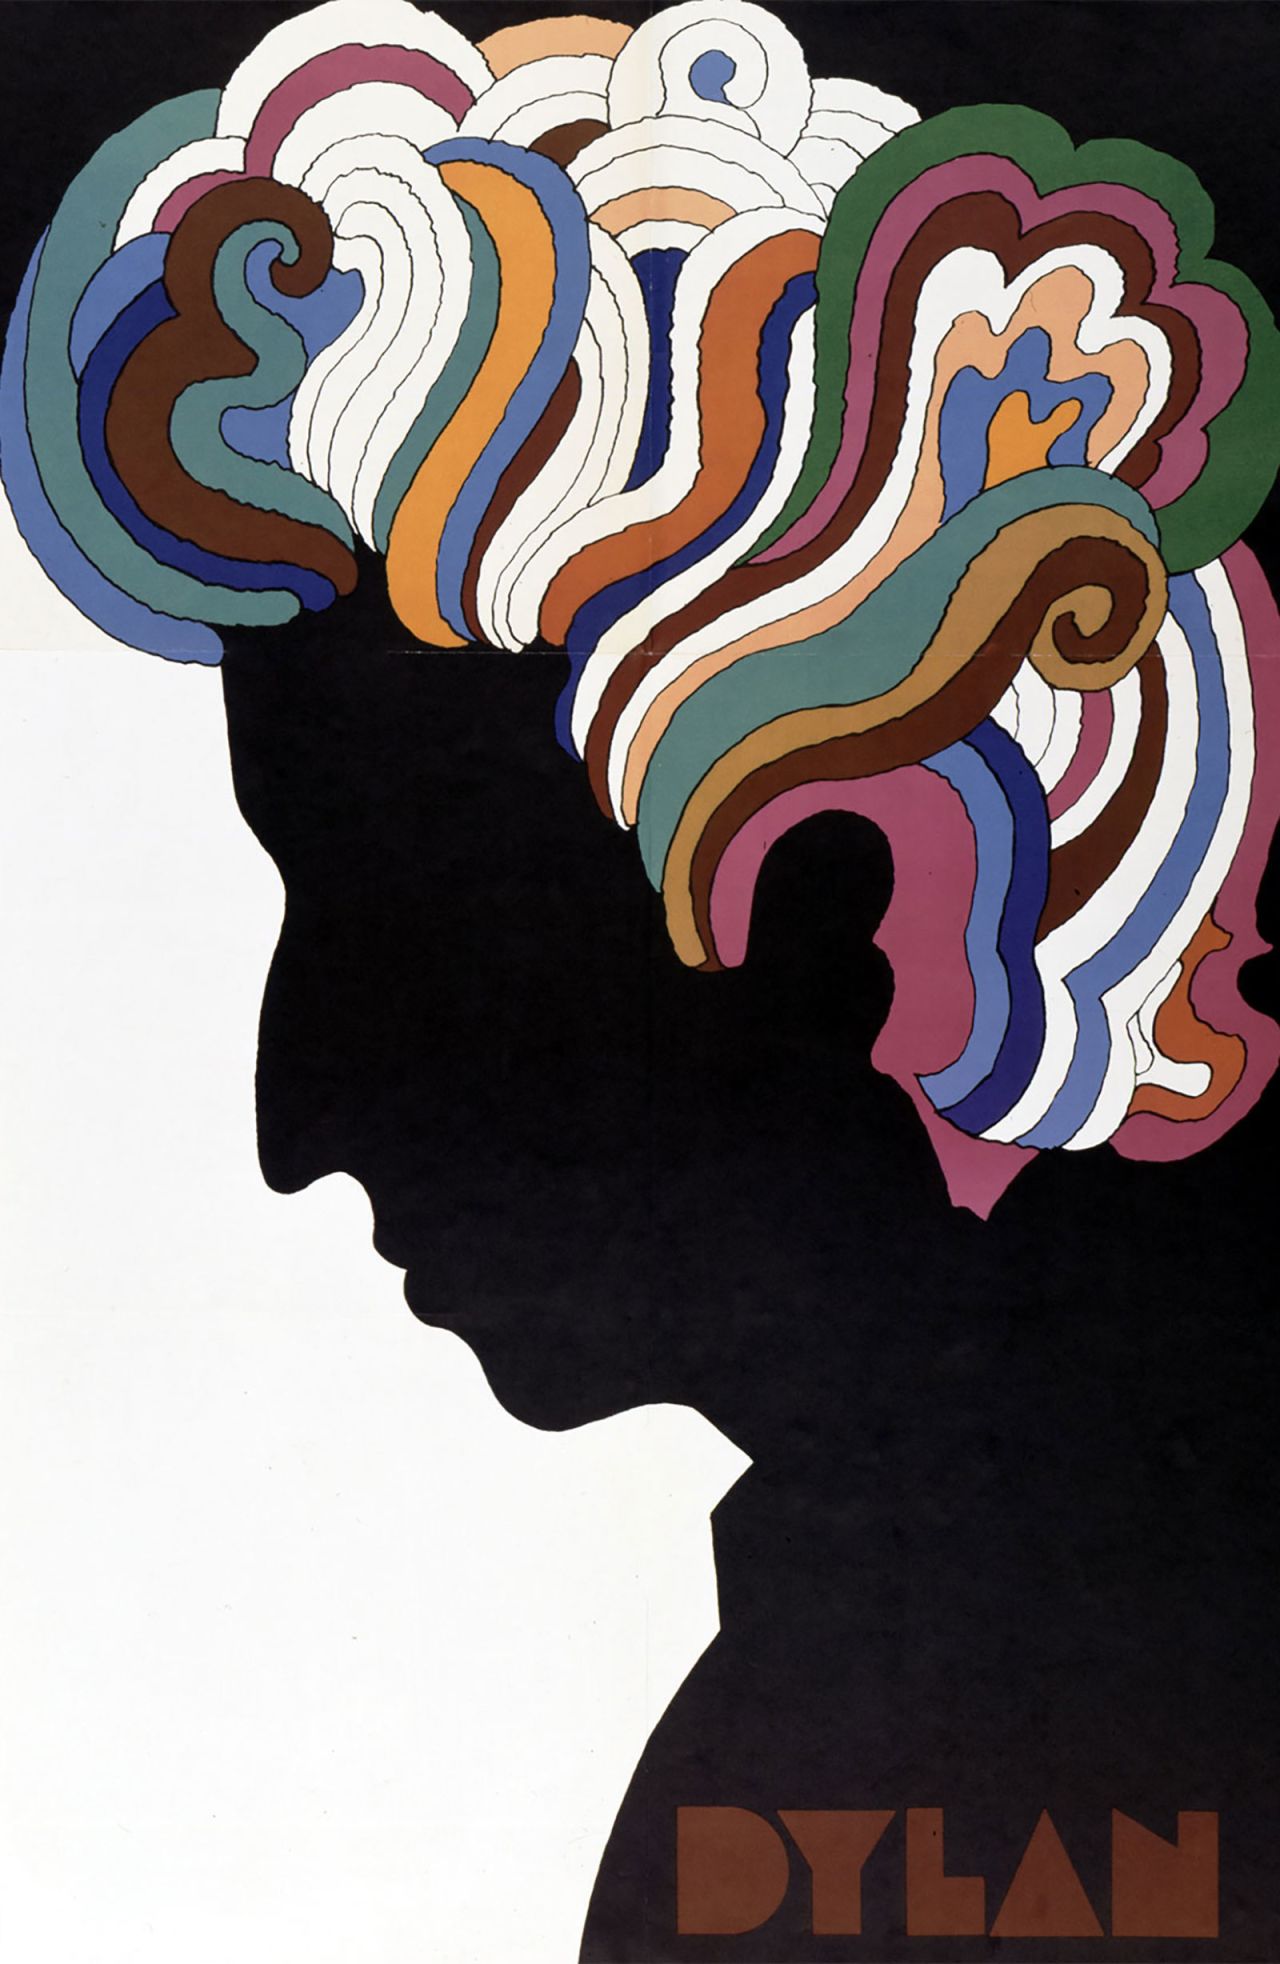 Glaser's fame grew with this poster for a Bob Dylan album in the 1960s.